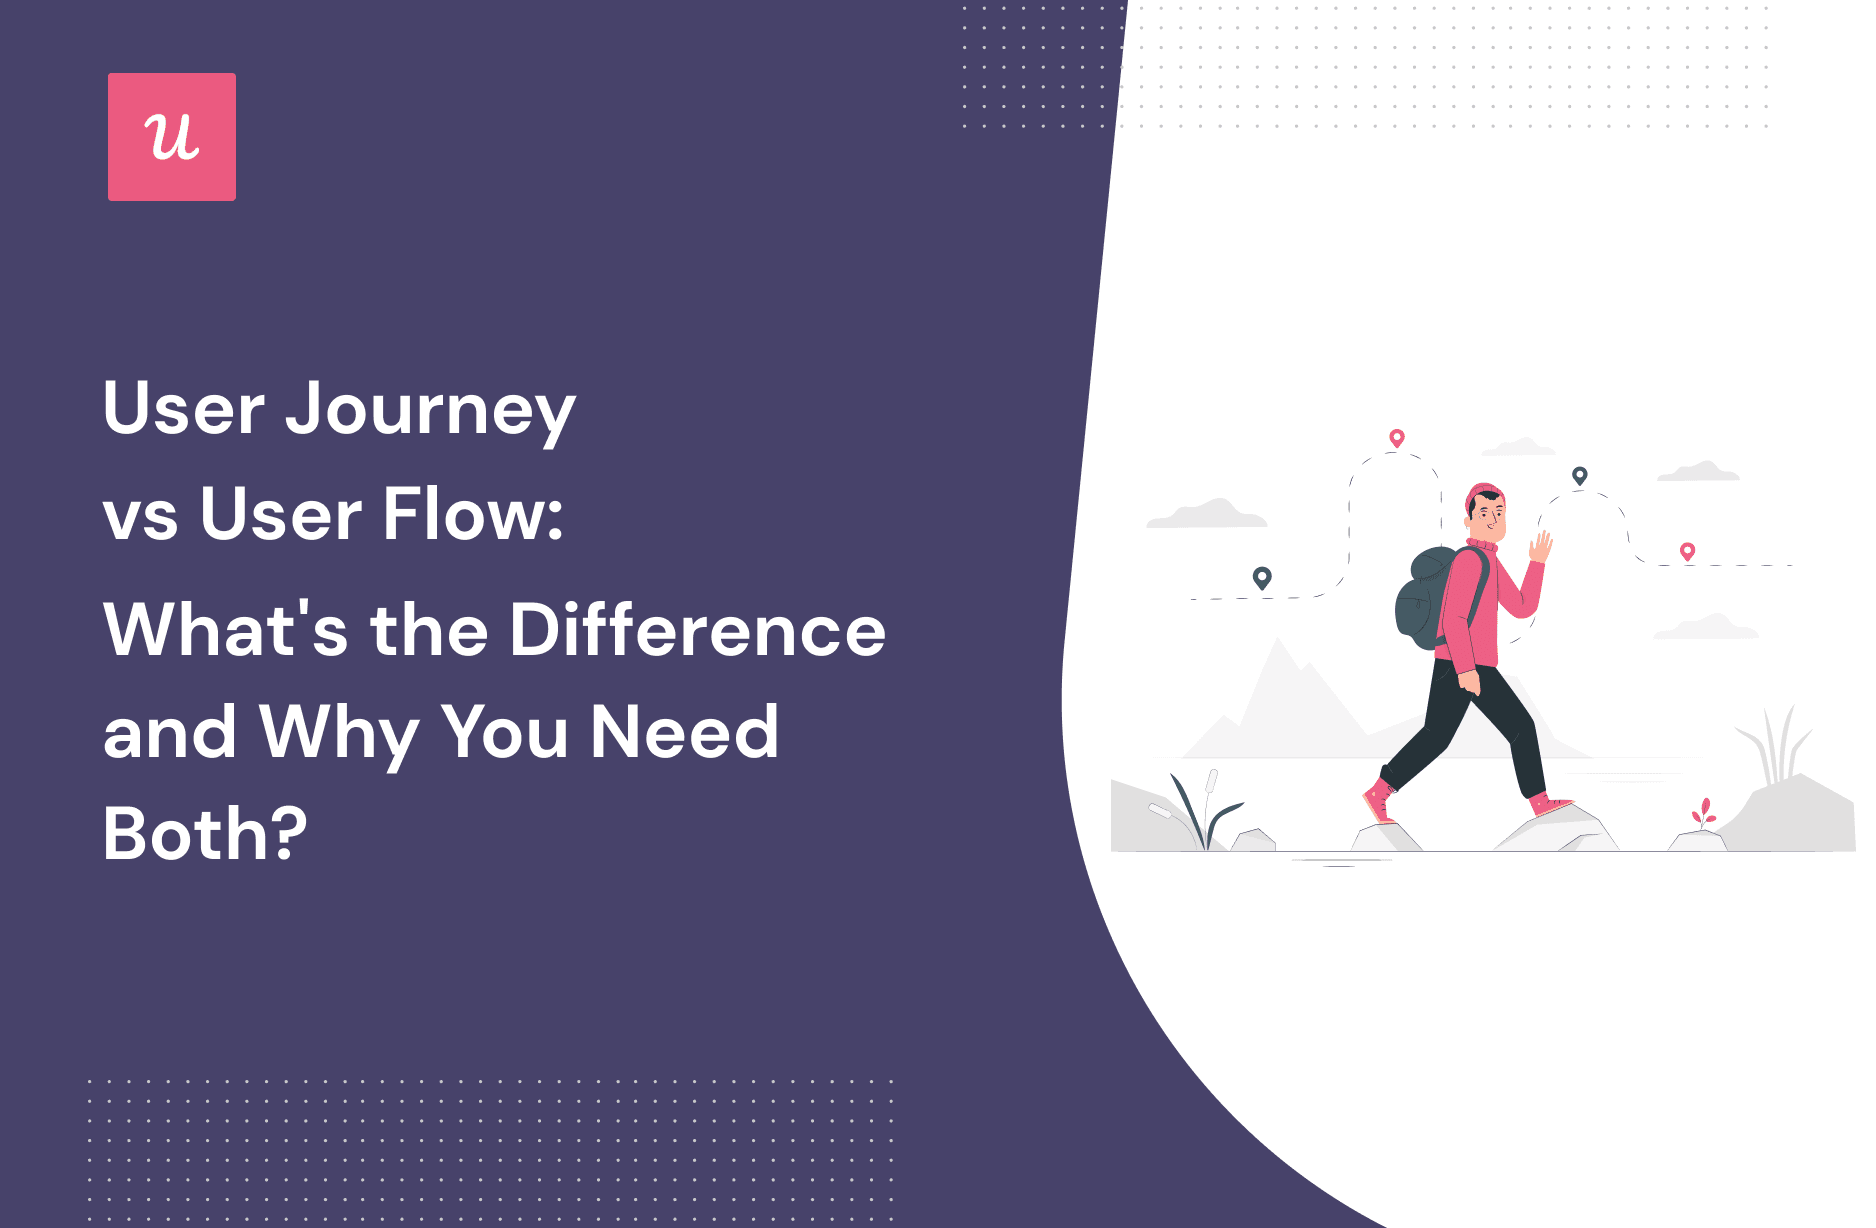 User Journey vs User Flow: What's the Difference and Why You Need Both?